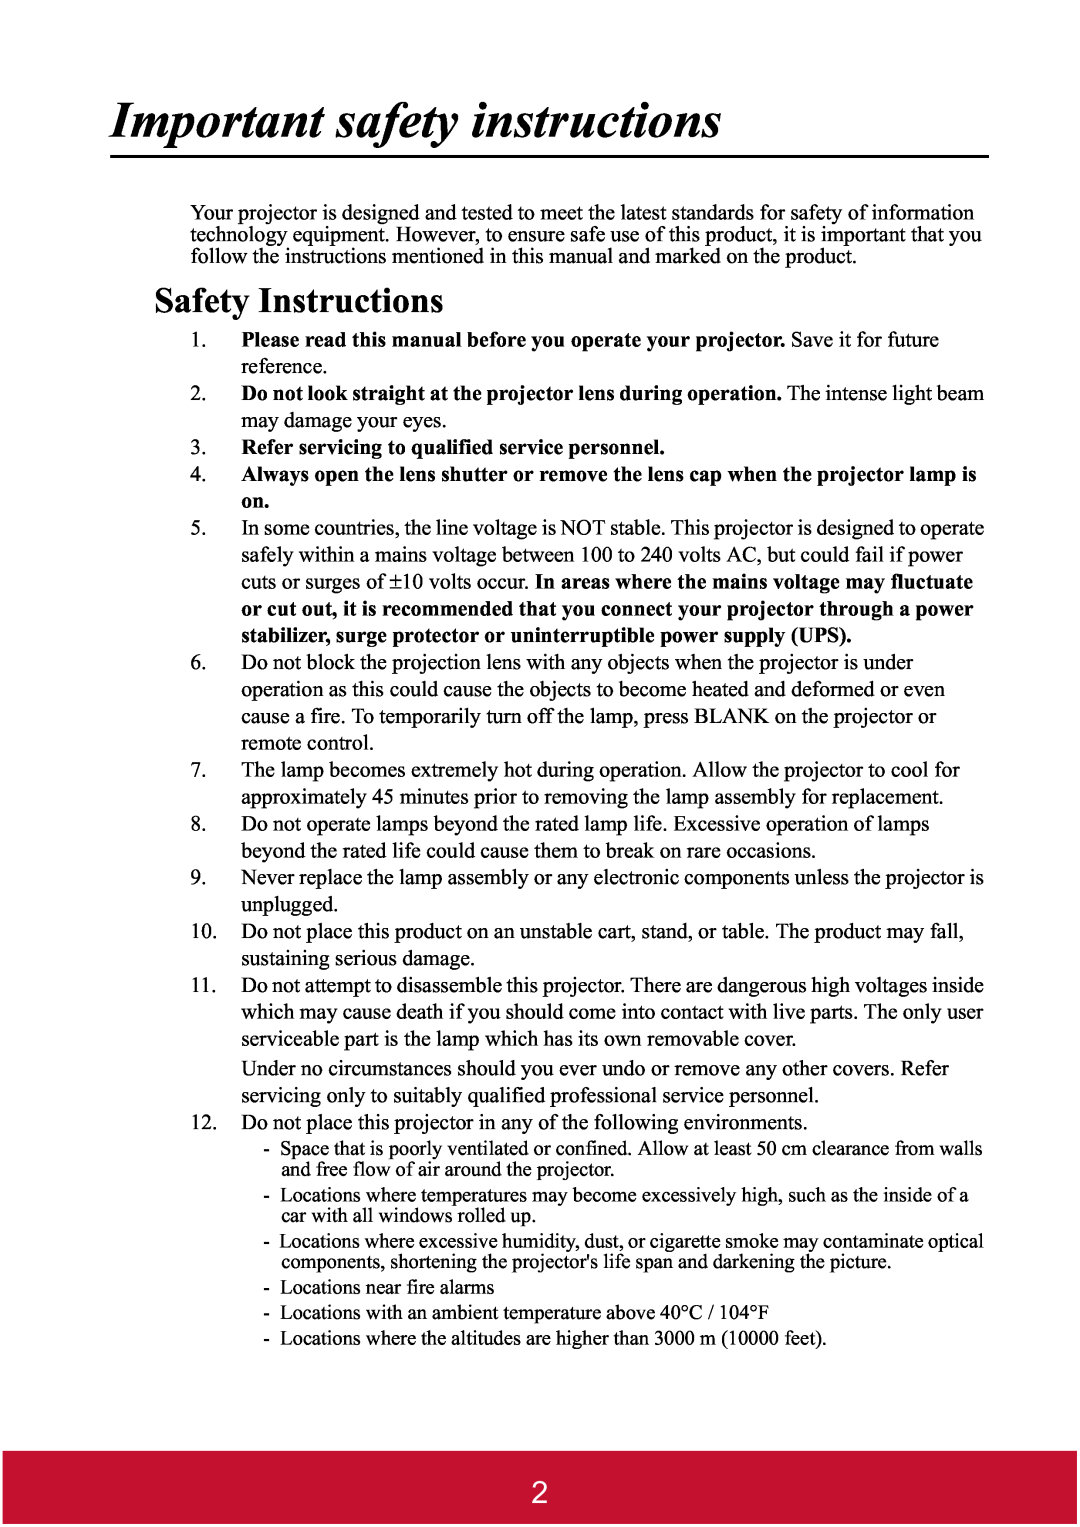 ViewSonic PJD7400W Safety Instructions, Important safety instructions, Refer servicing to qualified service personnel 